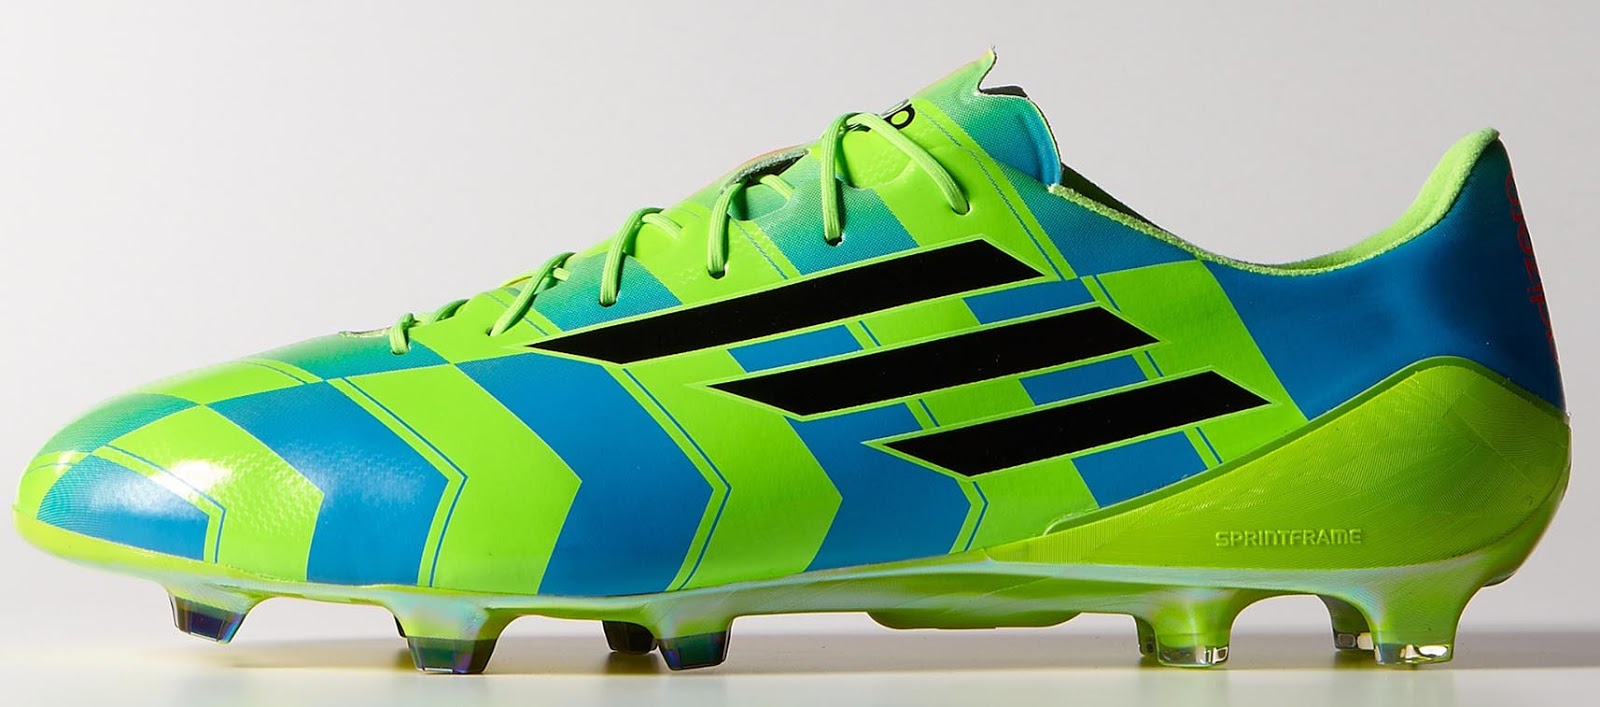 Colorful Adidas F50 Crazylight 14-15 Boot Launched Footy